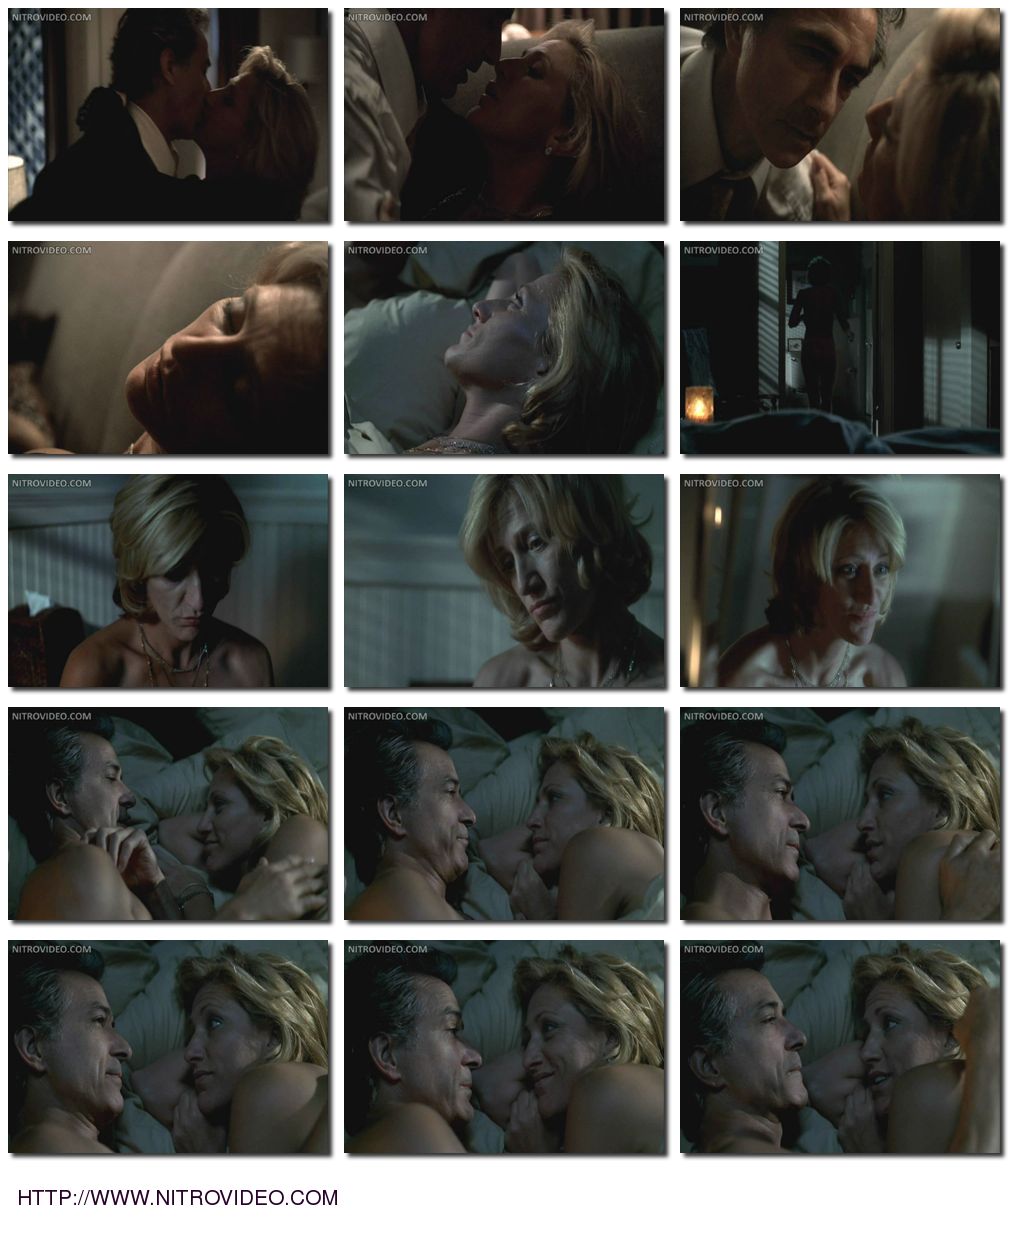 View the Sexy nude collage of Edie Falco in The Sopranos: Sentimental Educa...